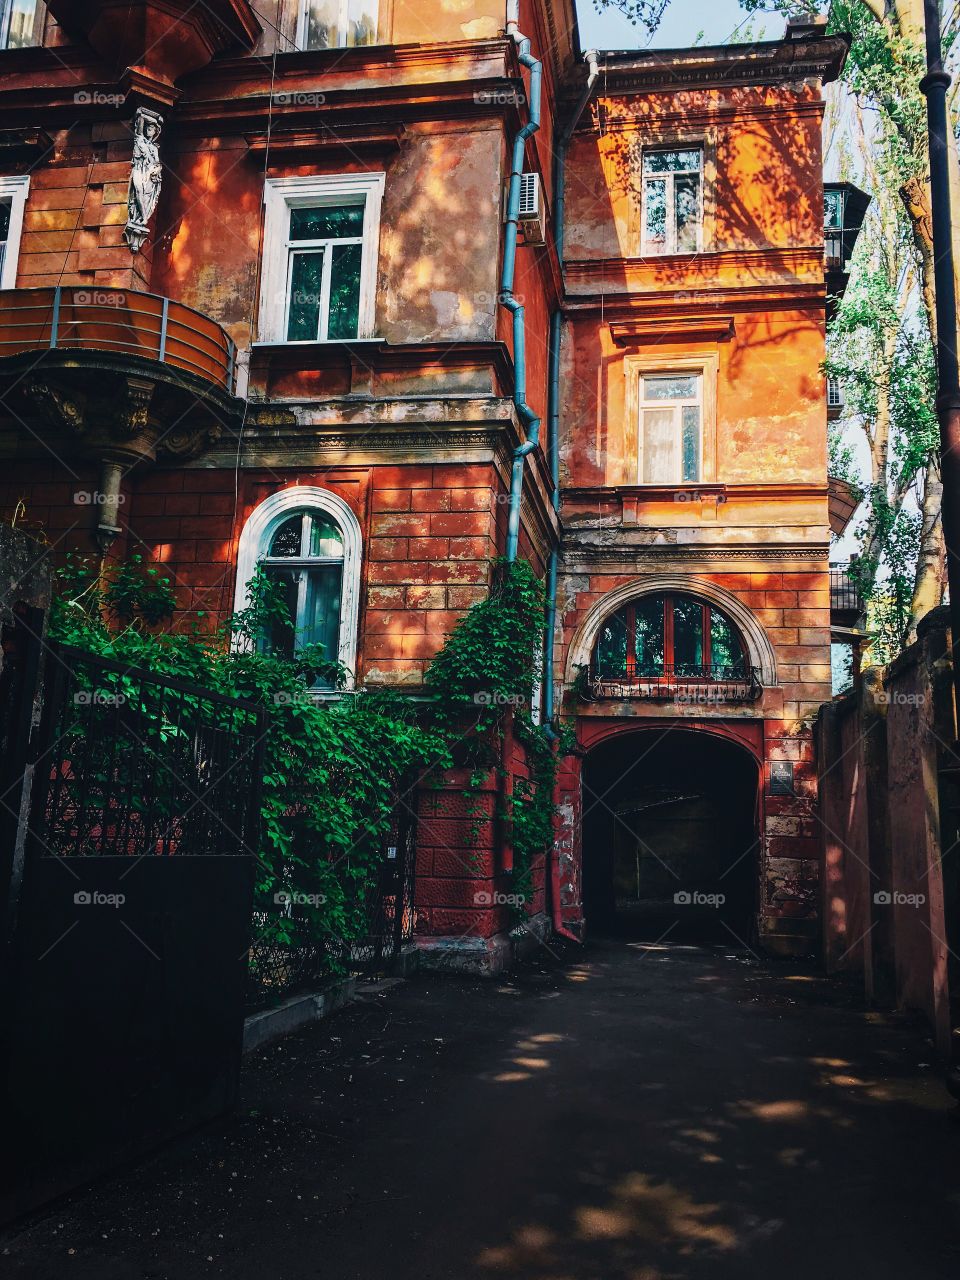 Very beautiful old town building 